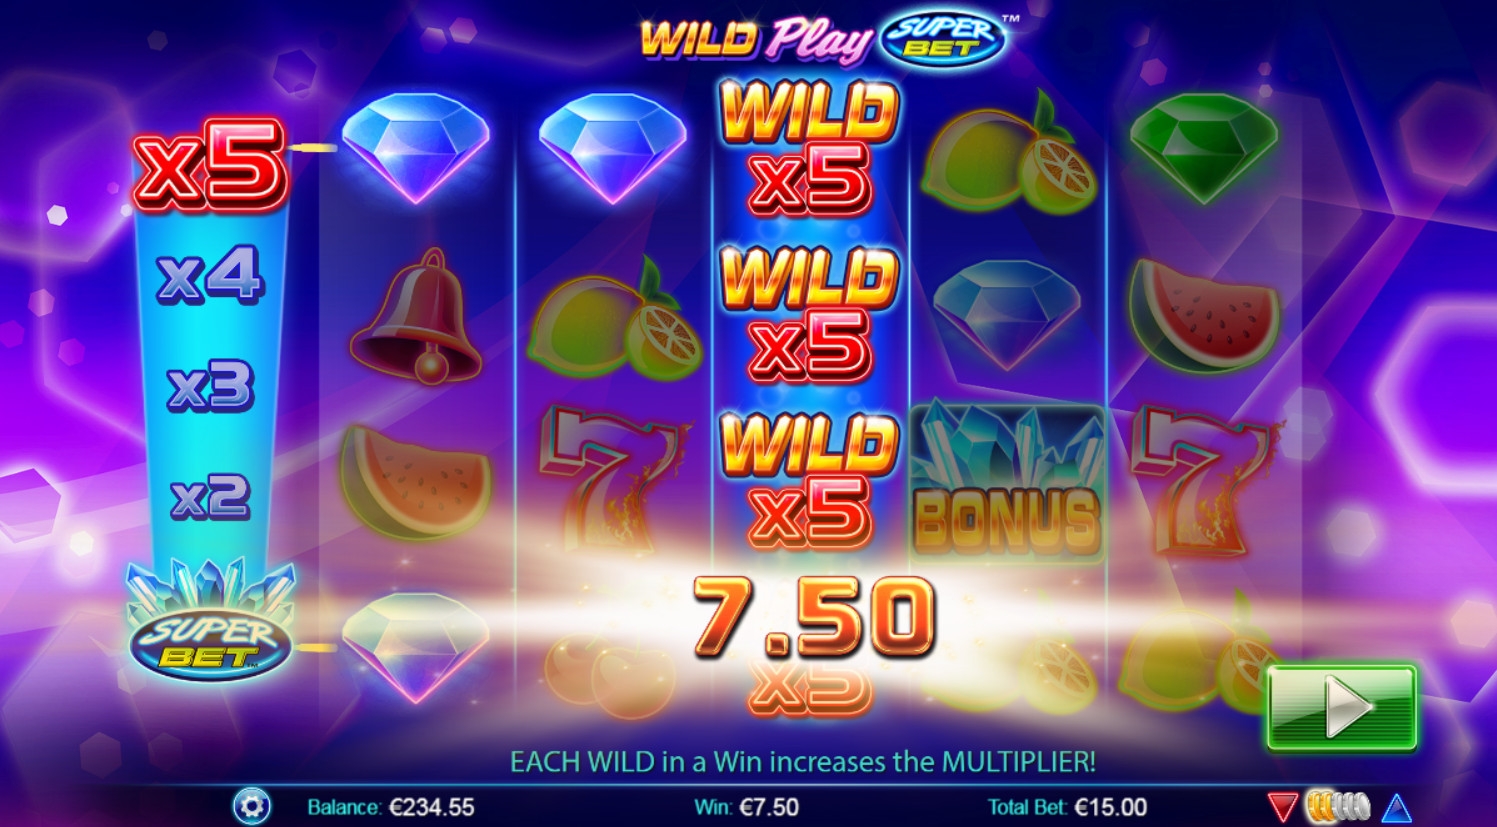 Wild Play: Super Bet (Wild Play Super Bet) from category Slots